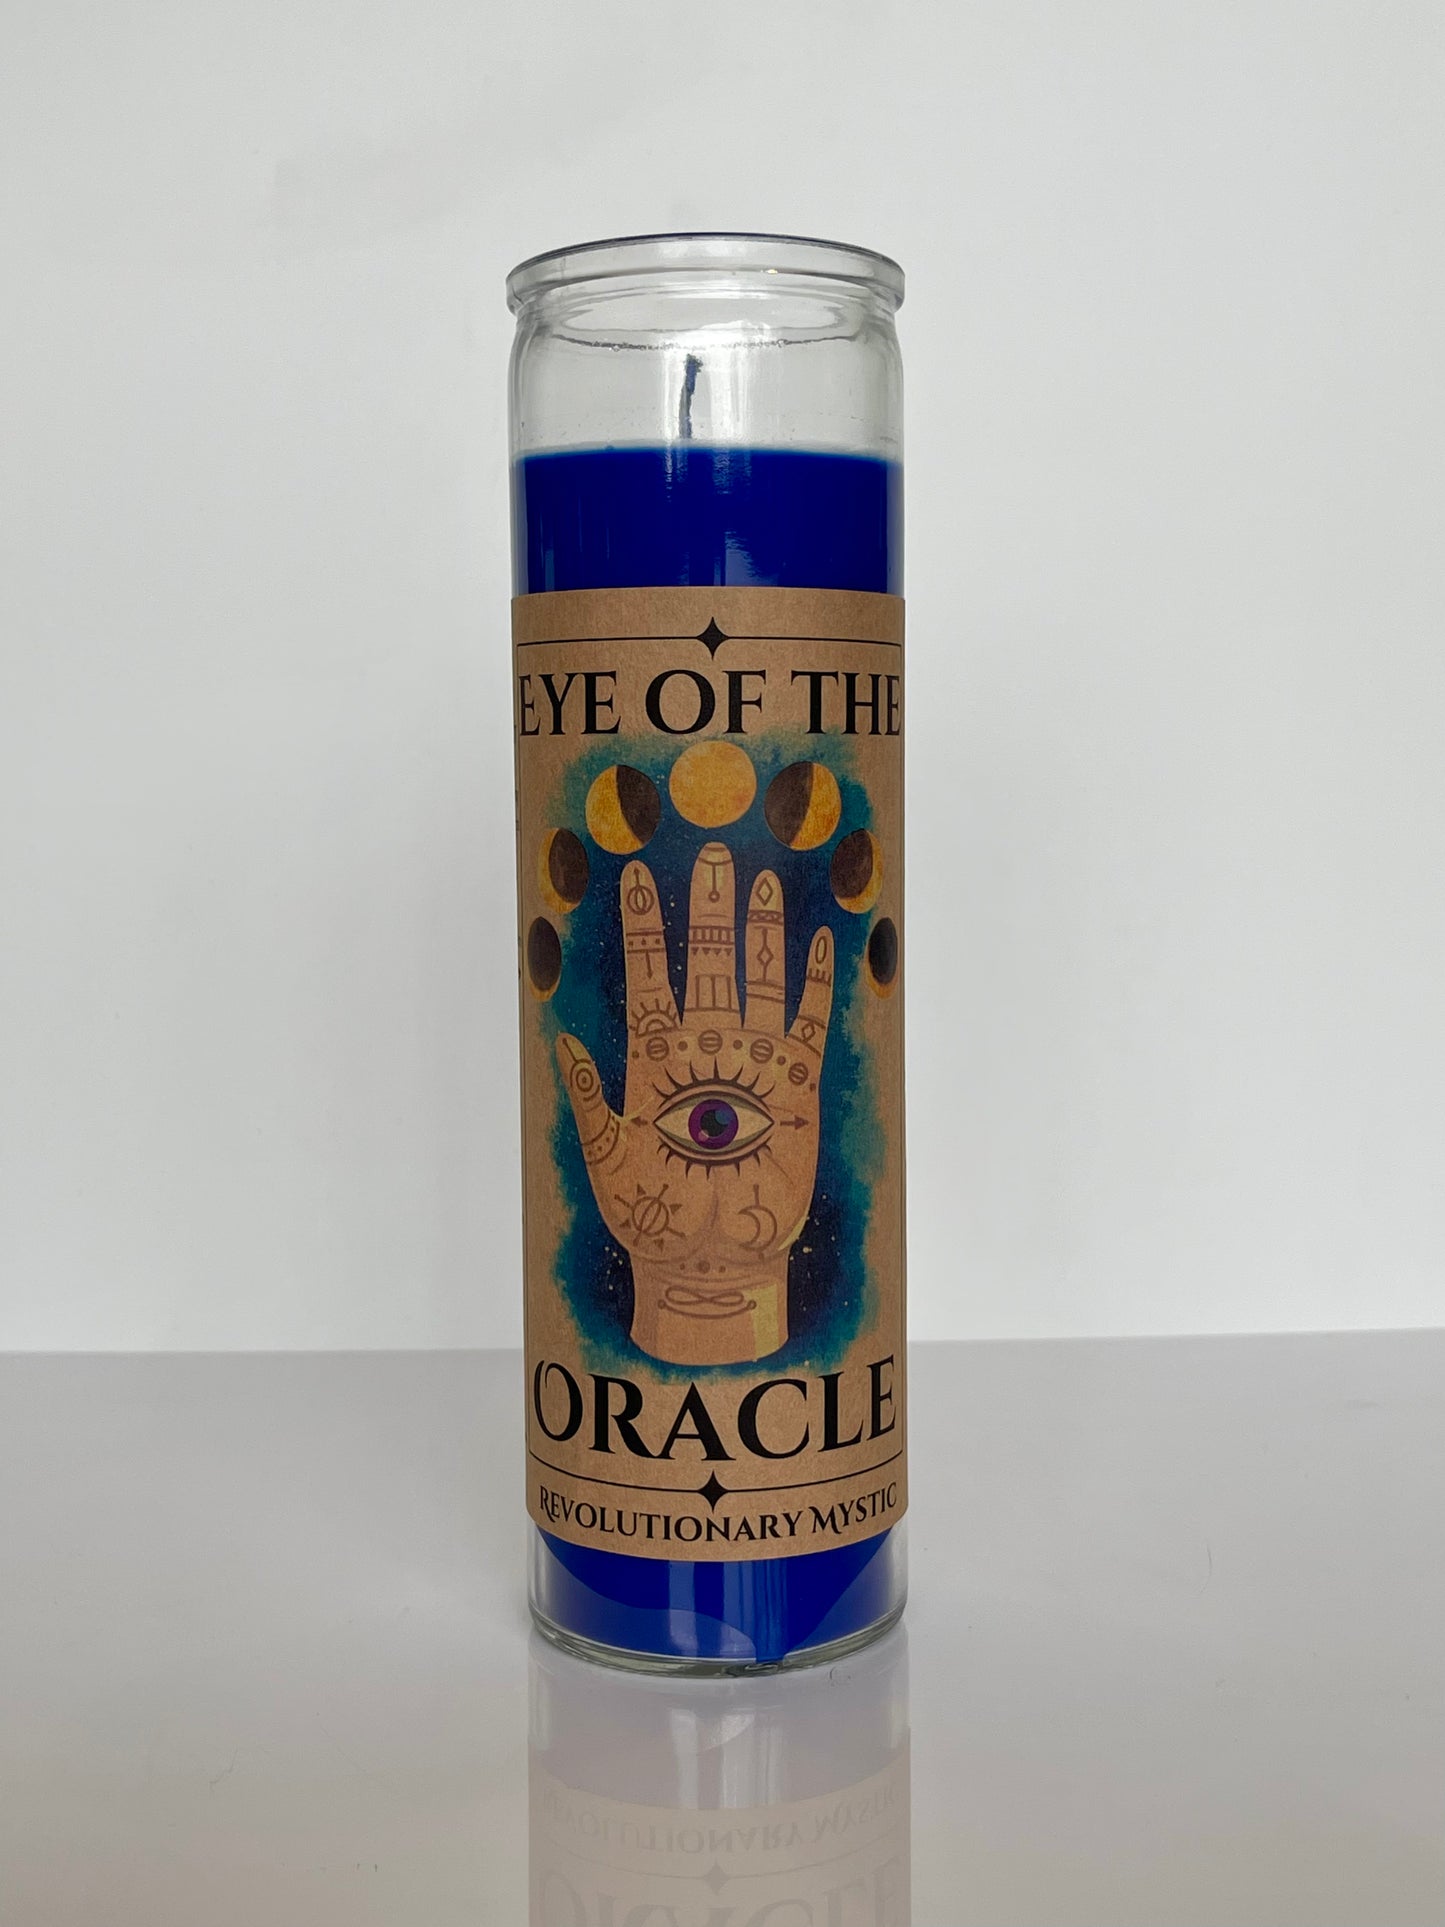 Eye of the Oracle - Revolutionary Mystic